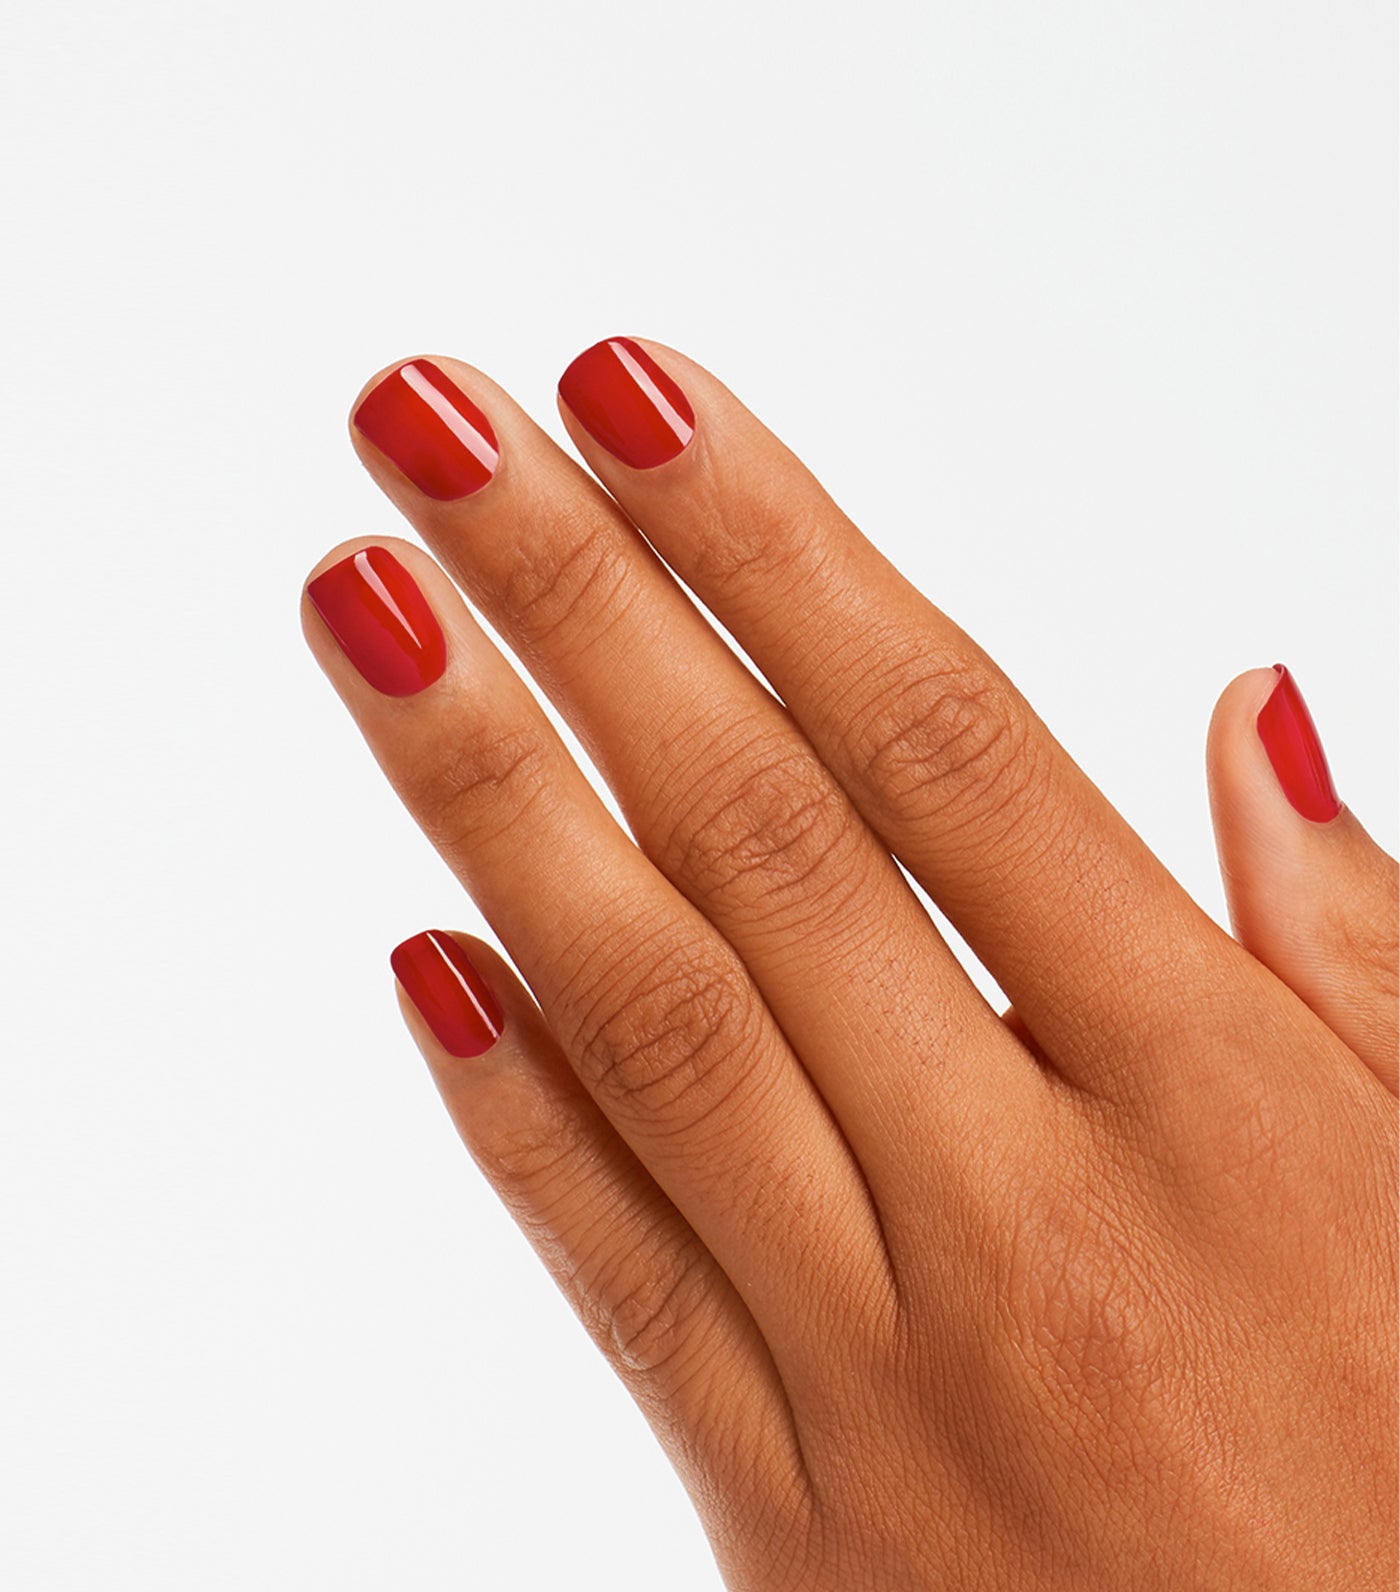 Nail Lacquer - Reds